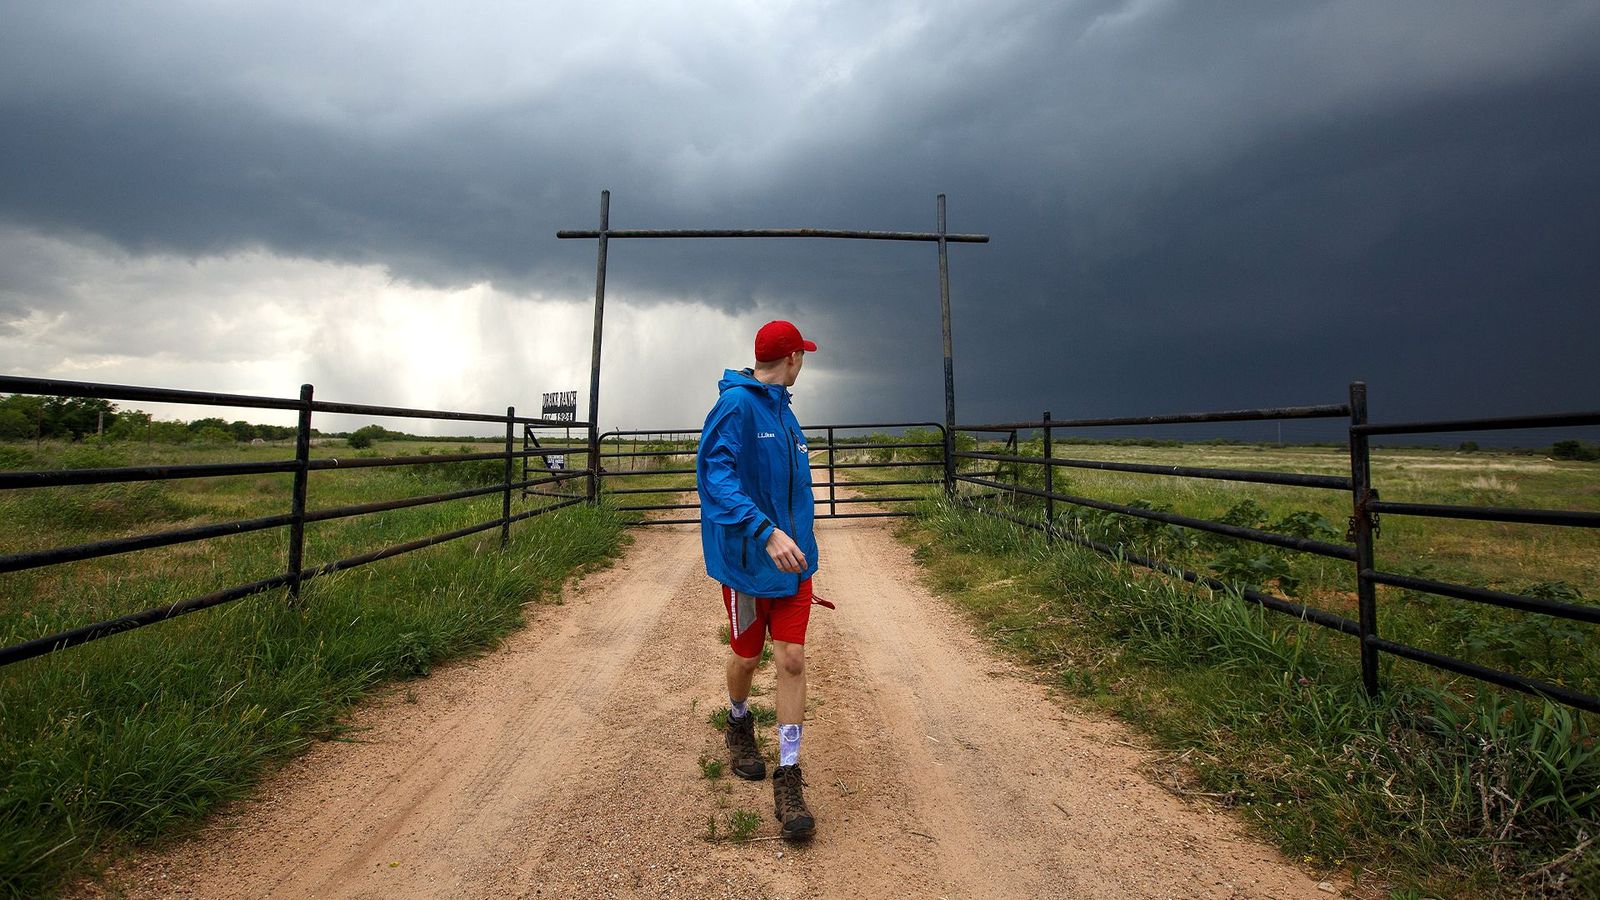 A researcher tracking tornadoes turns to watch a supercell thunderstorm in Texas (Credit: Getty Images)